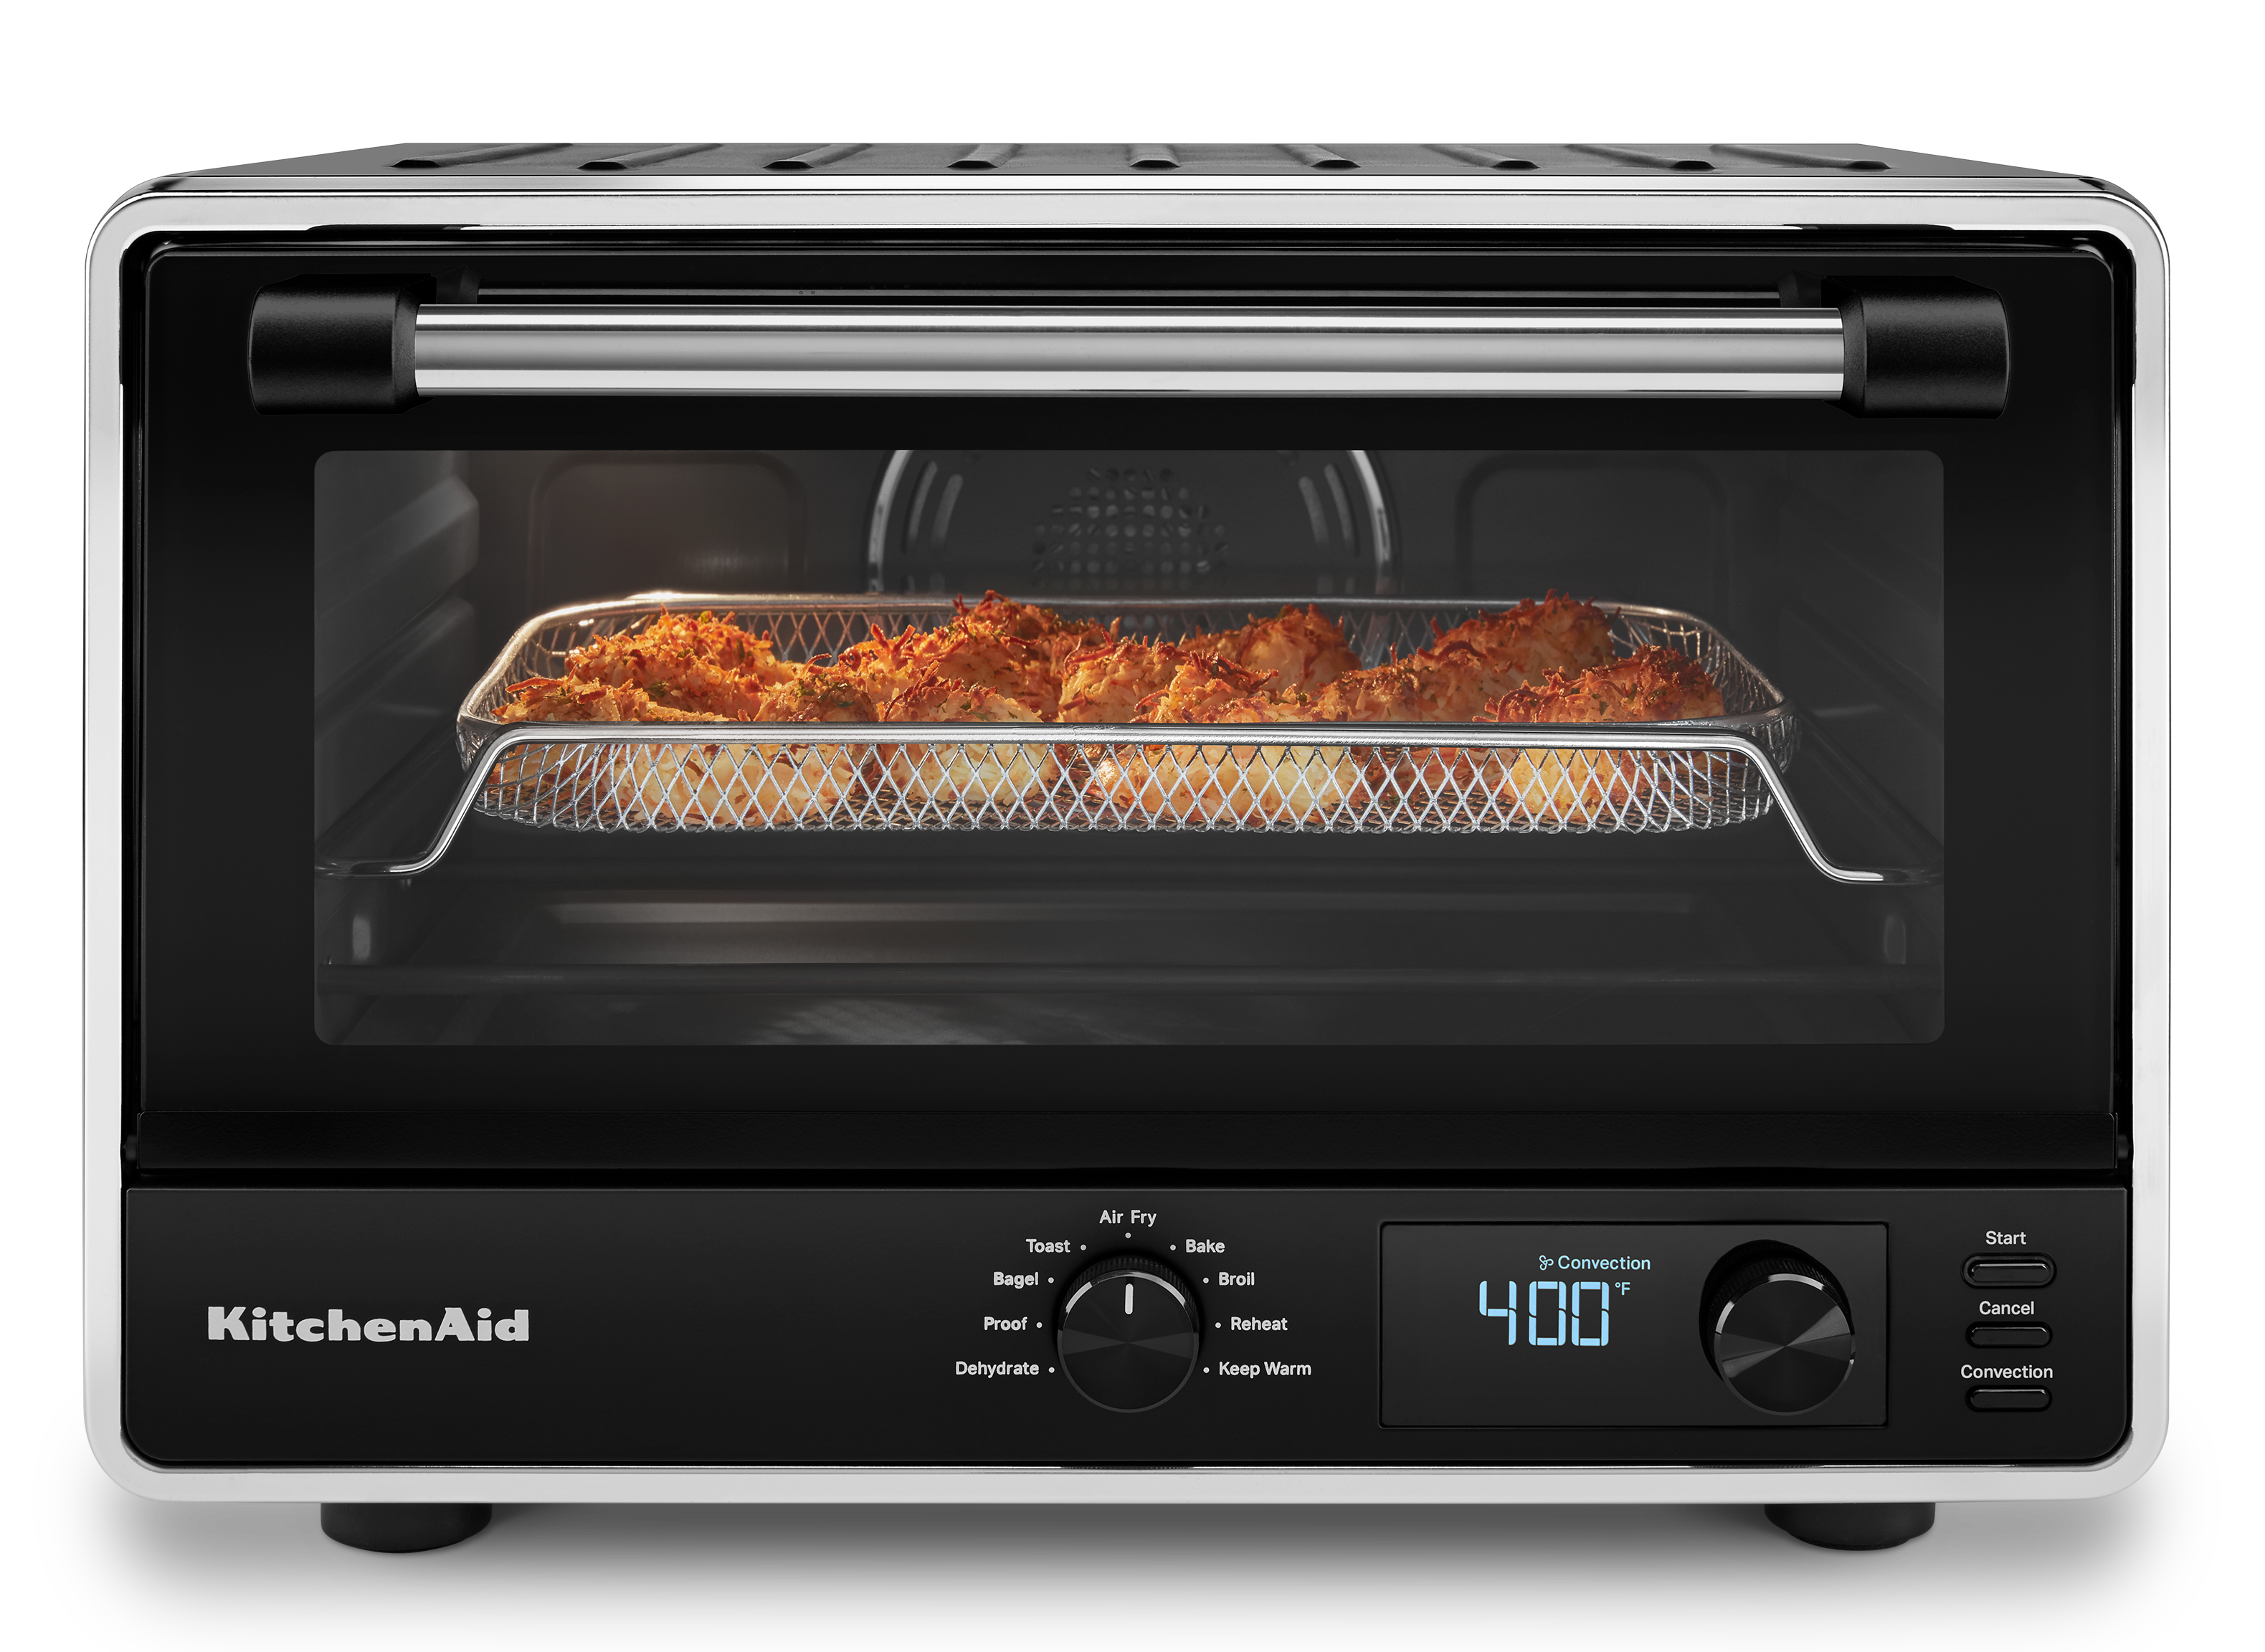 BAKEAFCTO1BM Kitchenaid Digital Countertop Oven with Air Fry and 3